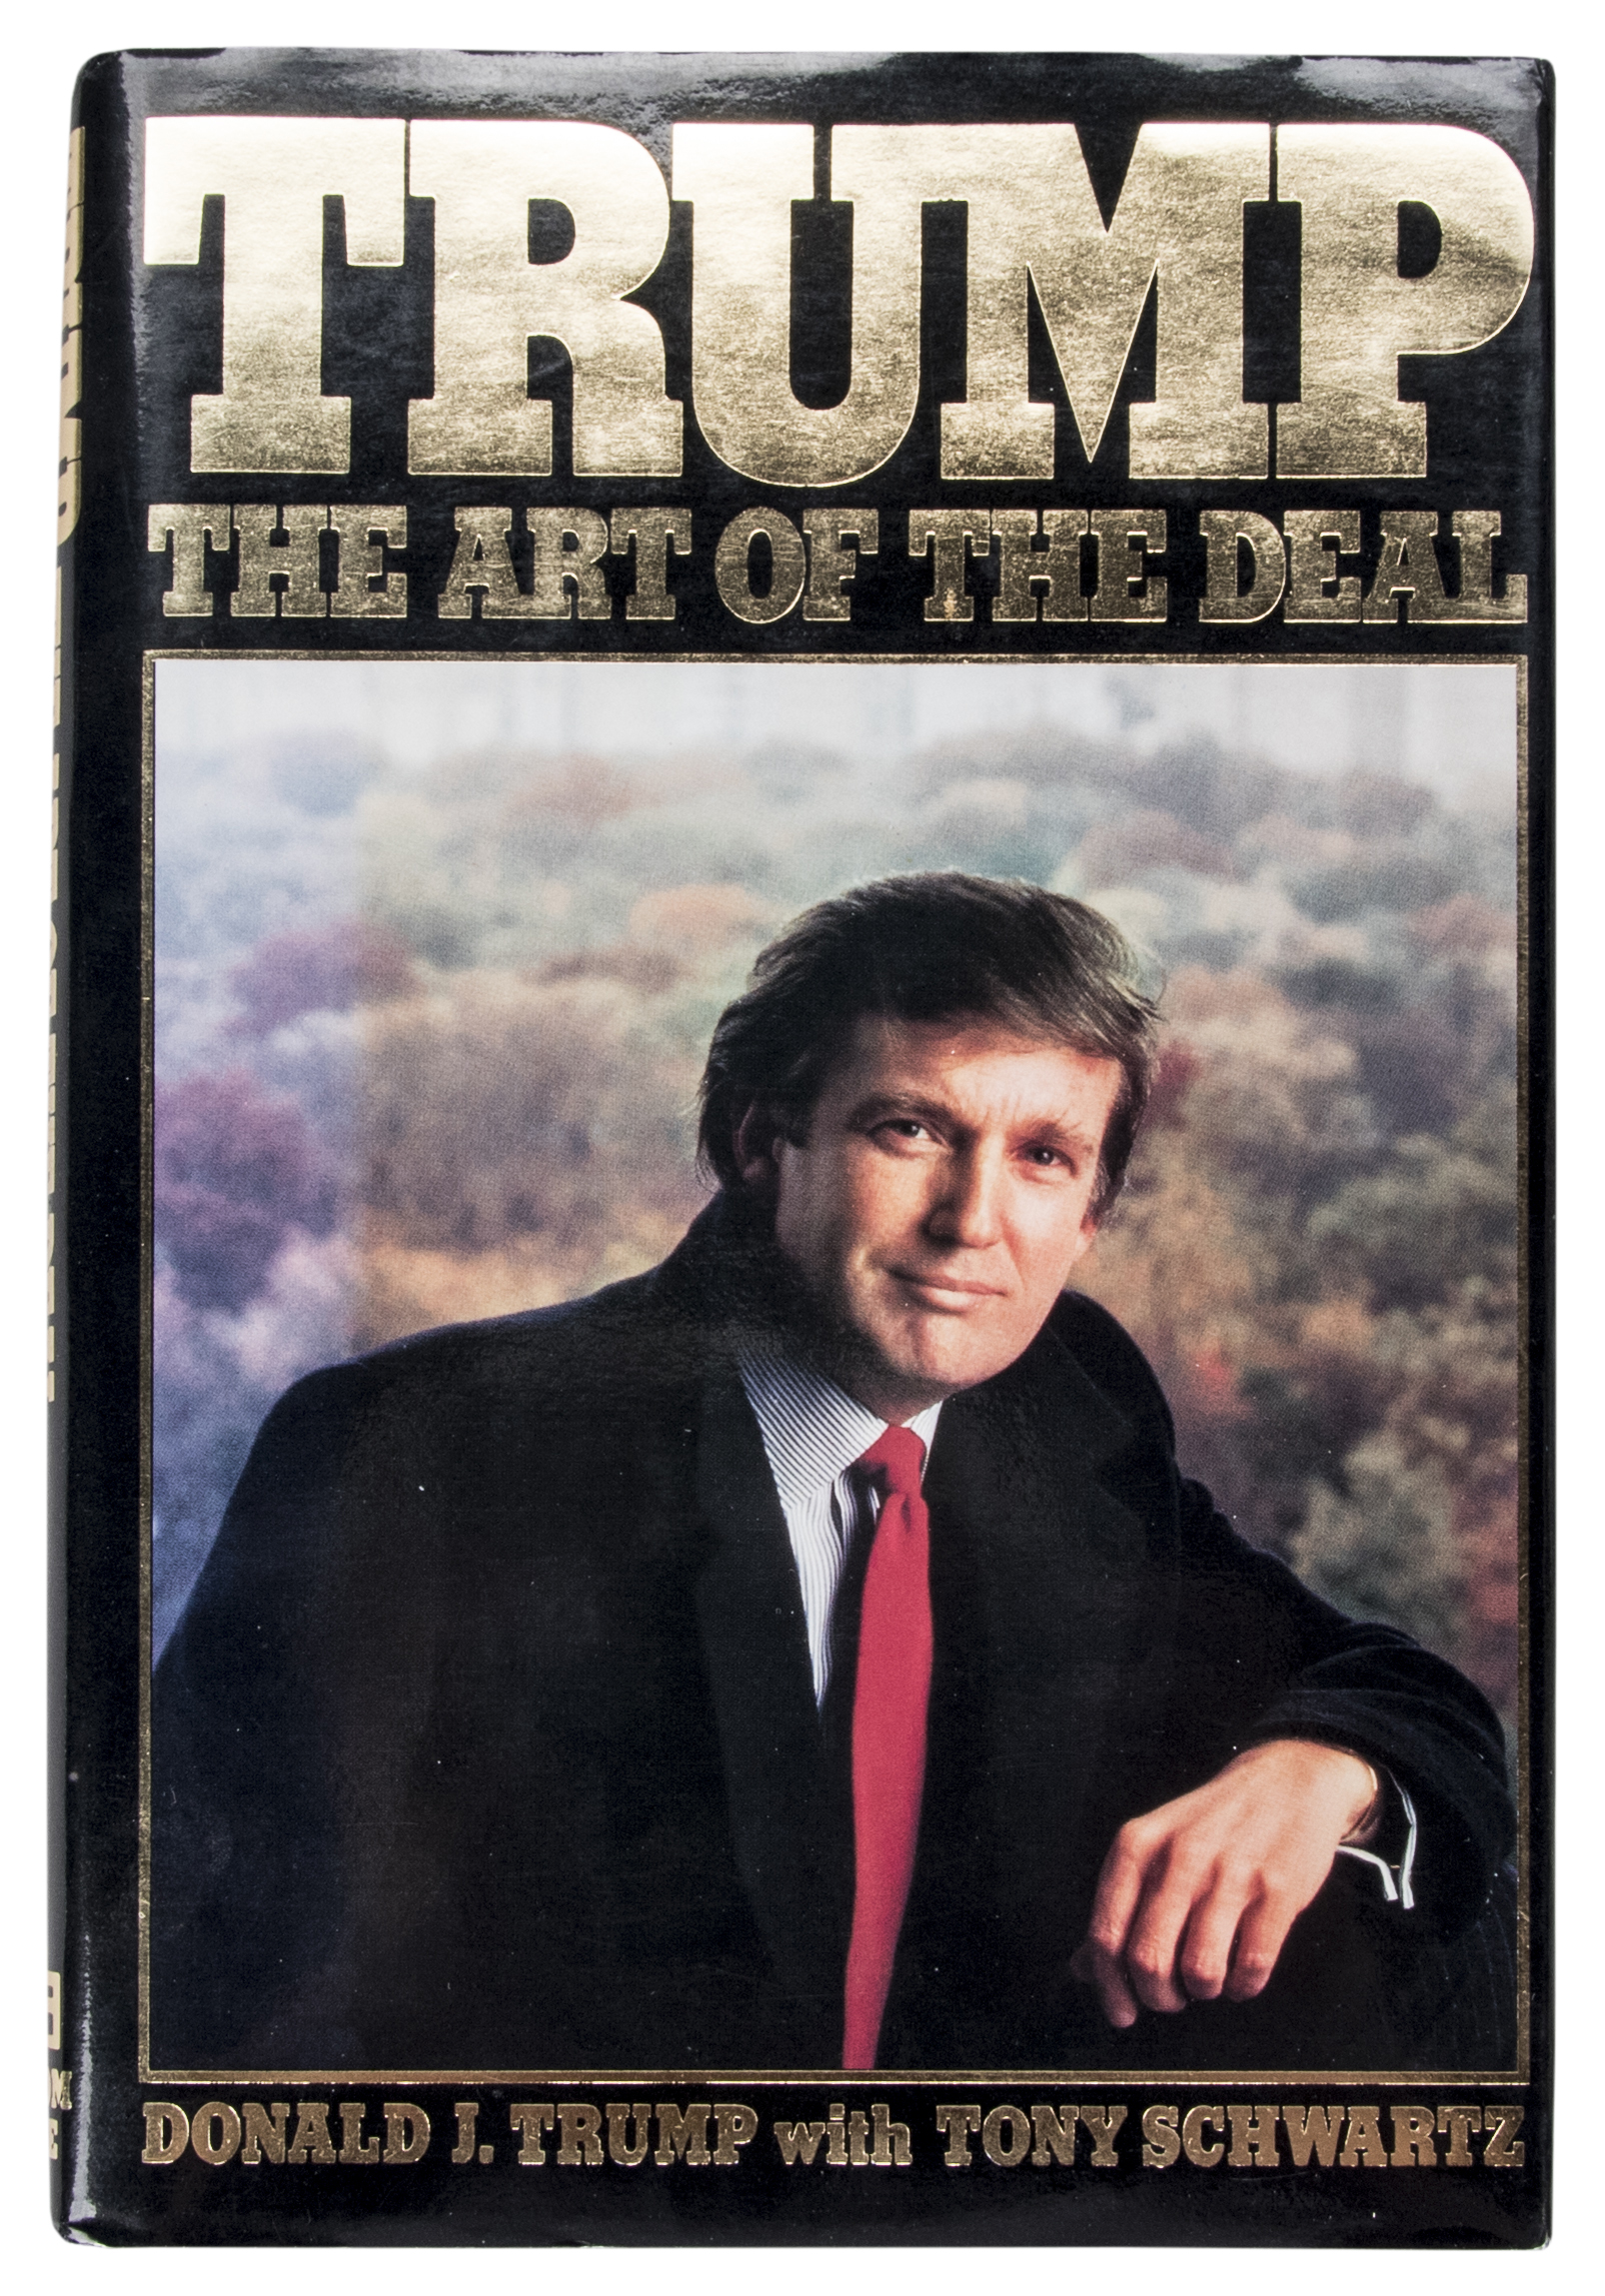 The deal read. Trump: the Art of the deal книга. Art of the deal. Трамп deal. Donald Trump's the Art of the deal: the movie 2017.